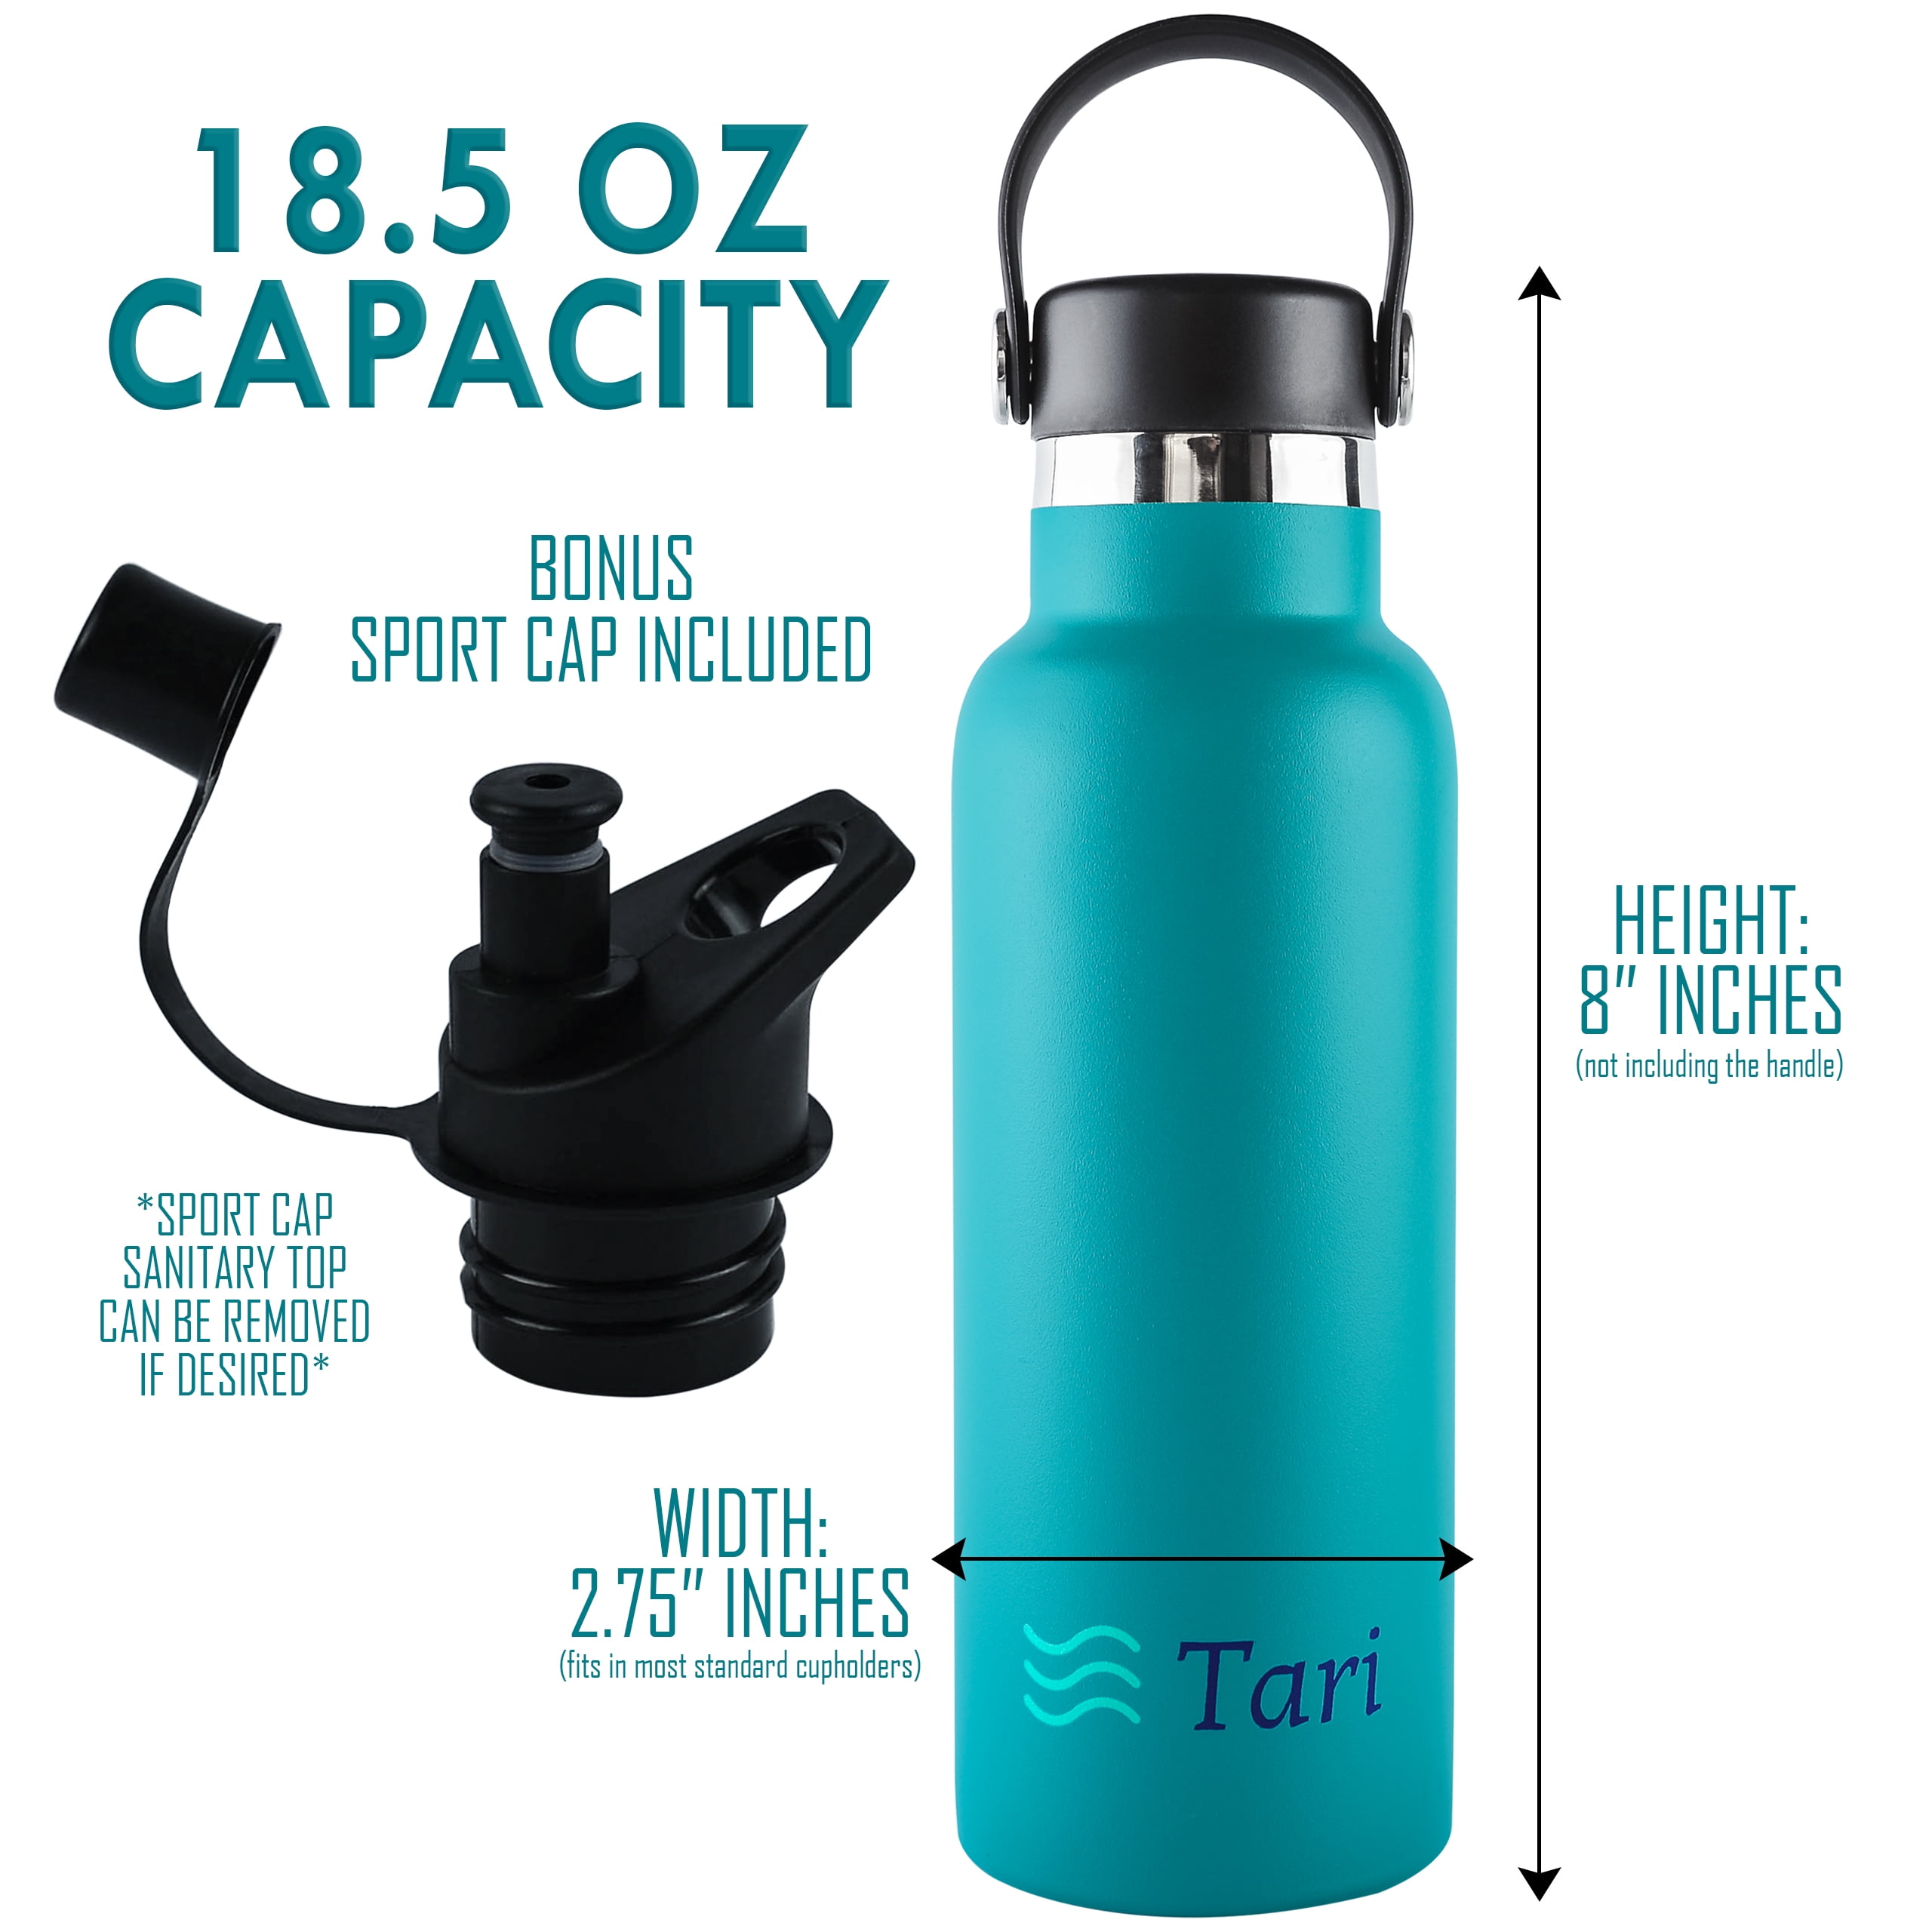 Triple Insulated Stainless Steel Water Bottle with Straw Lid 